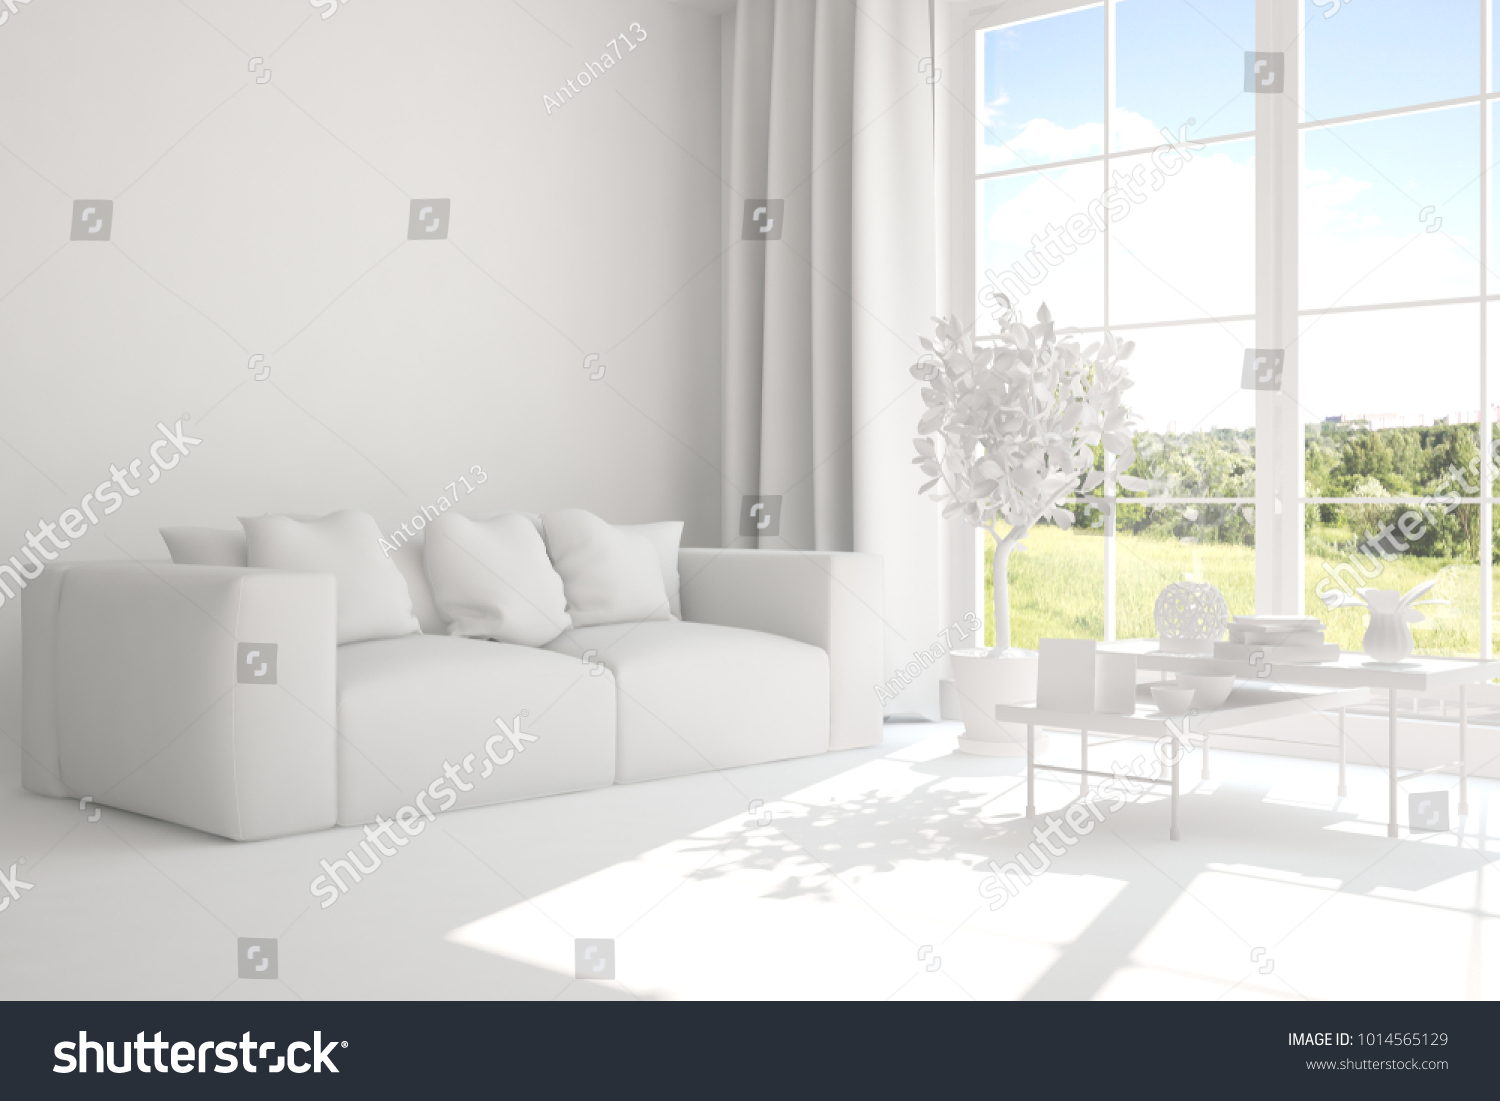 White room with sofa and green landscape in window. Scandinavian interior design. 3D illustration #1014565129